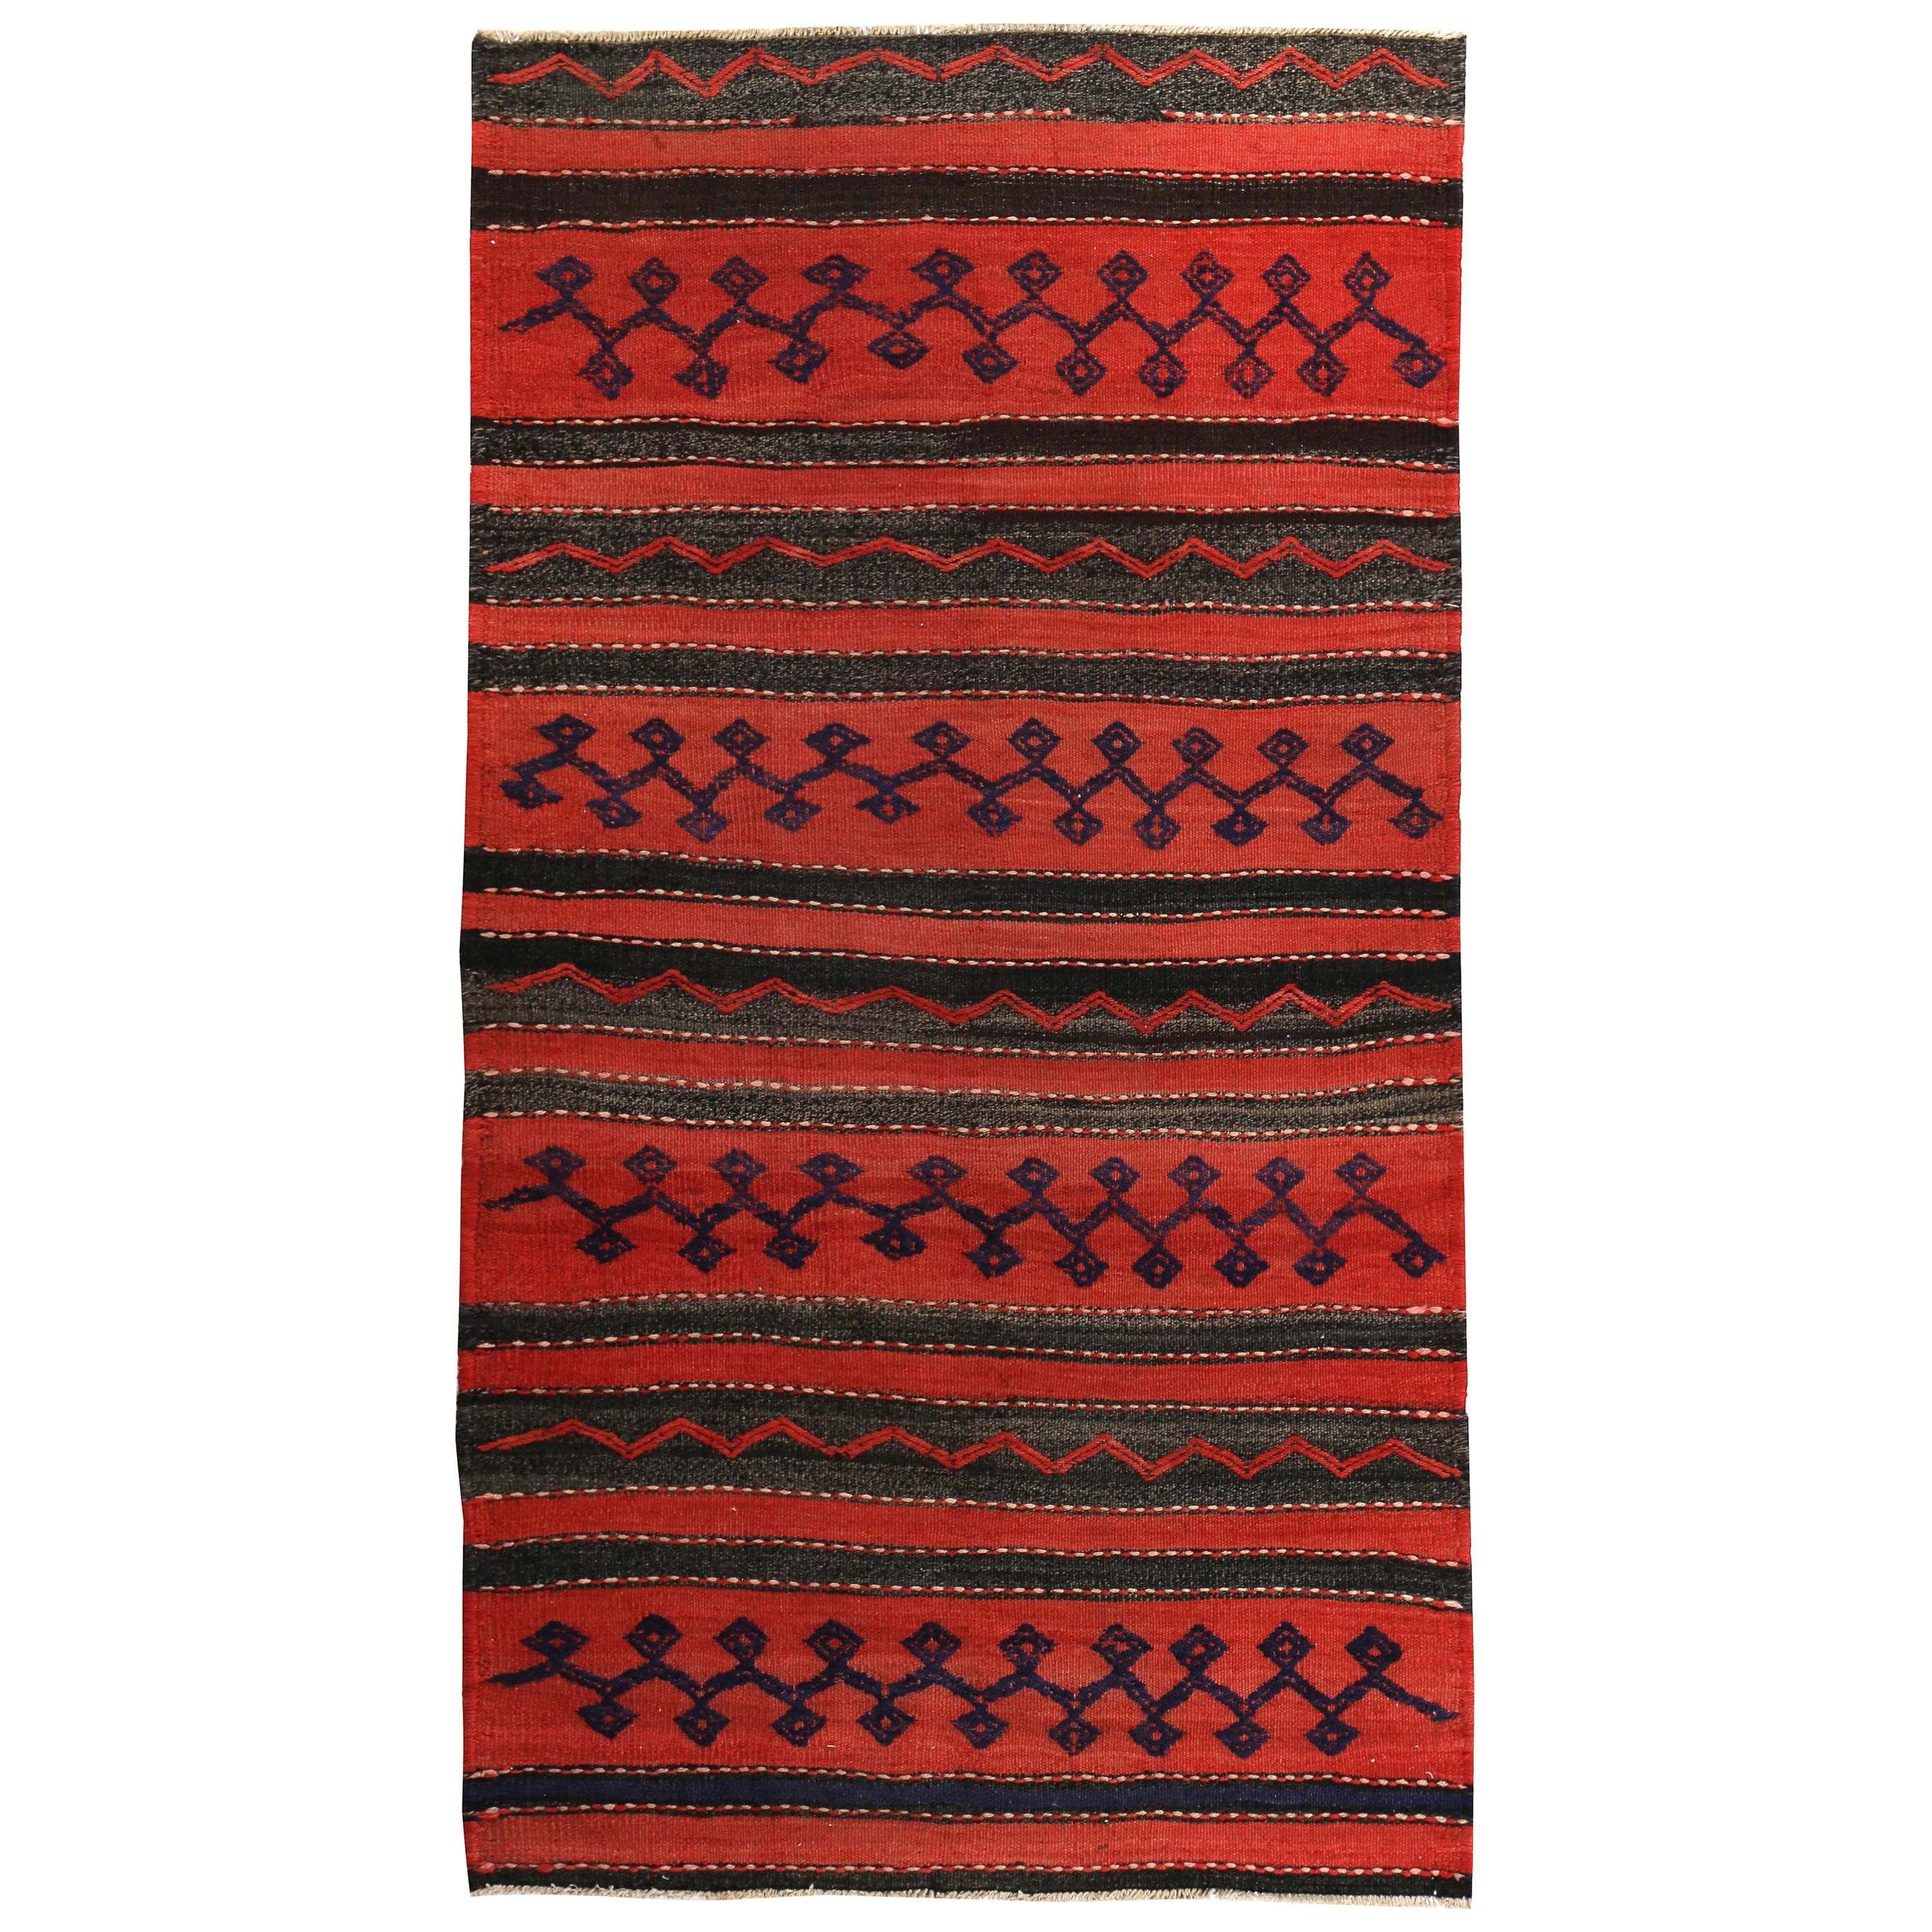 Turkish Kilim Rug in Red Black and Tribal Stripes in Navy